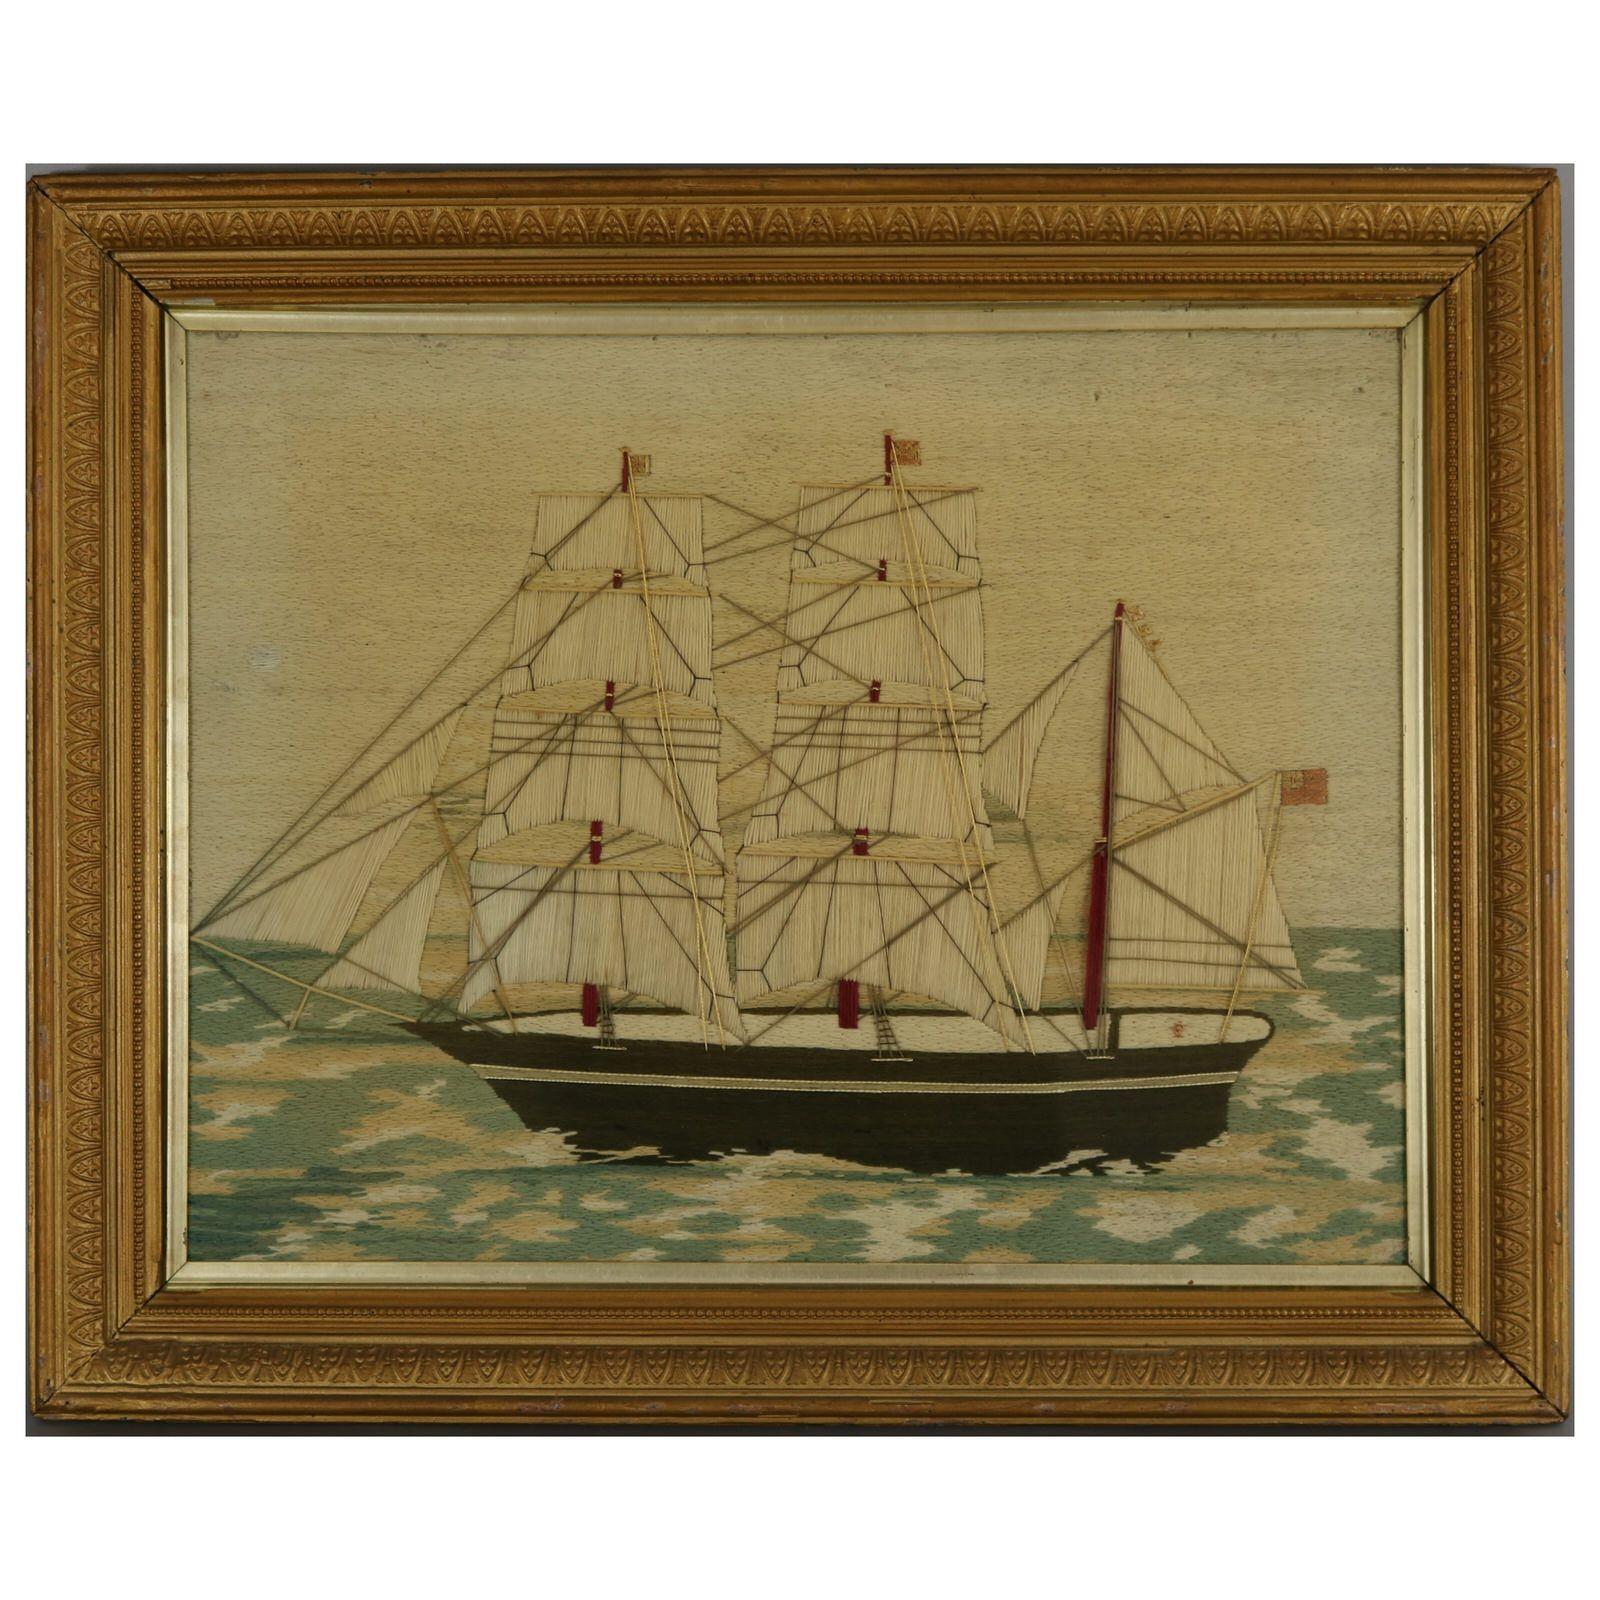 Pair of Sailors Woolwork Pictures of a Man-of-War Ships. Worked in wool on a canvas ground. Colours white, blue, brown, red, pink and cream. Both feature a three-masted Man-of-War ship, flying a British red ensign flag (a flag that originated in the